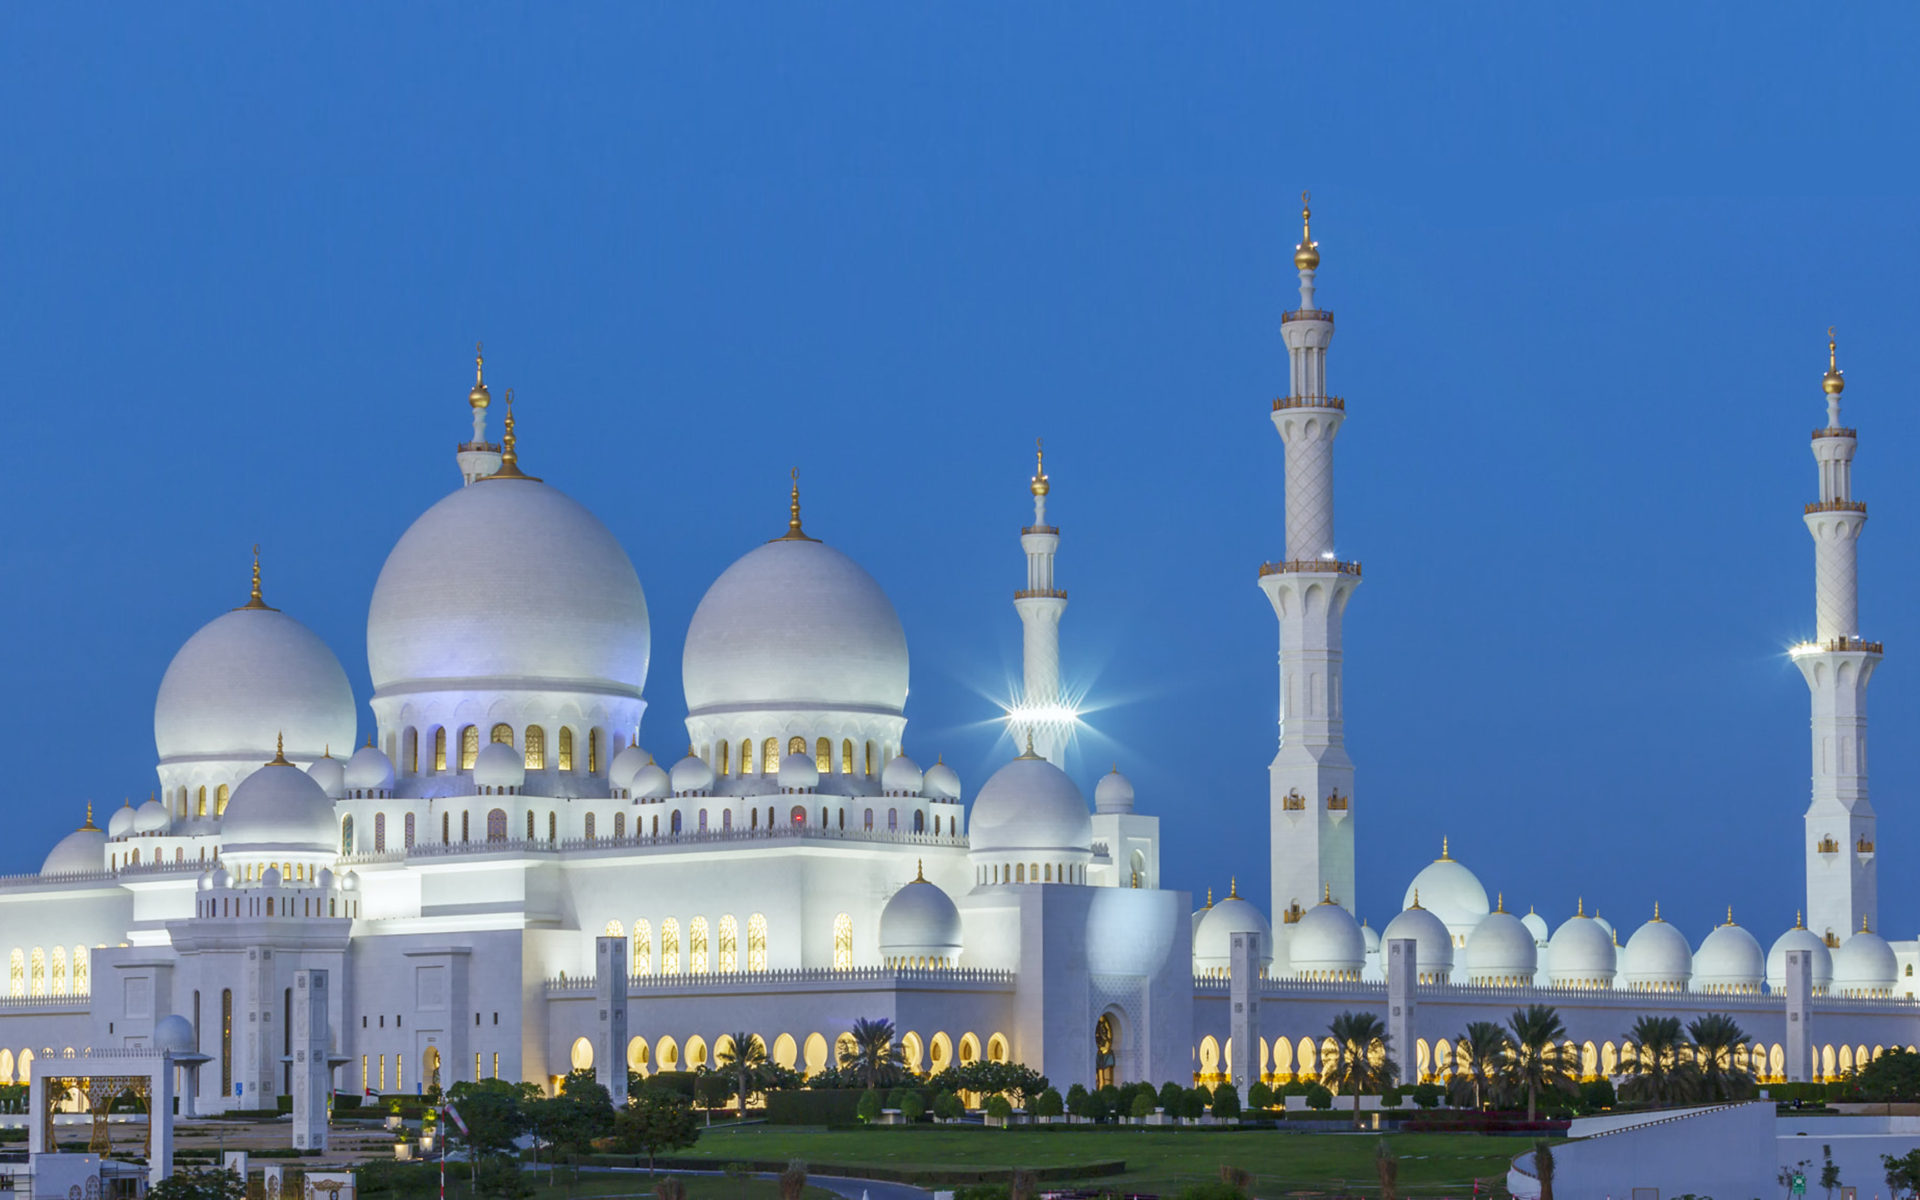 Abu dhabi sheikh zayed mosque view at night uae k ultra hd desktop wallpapers for puters laptop tablet and mobile phones x